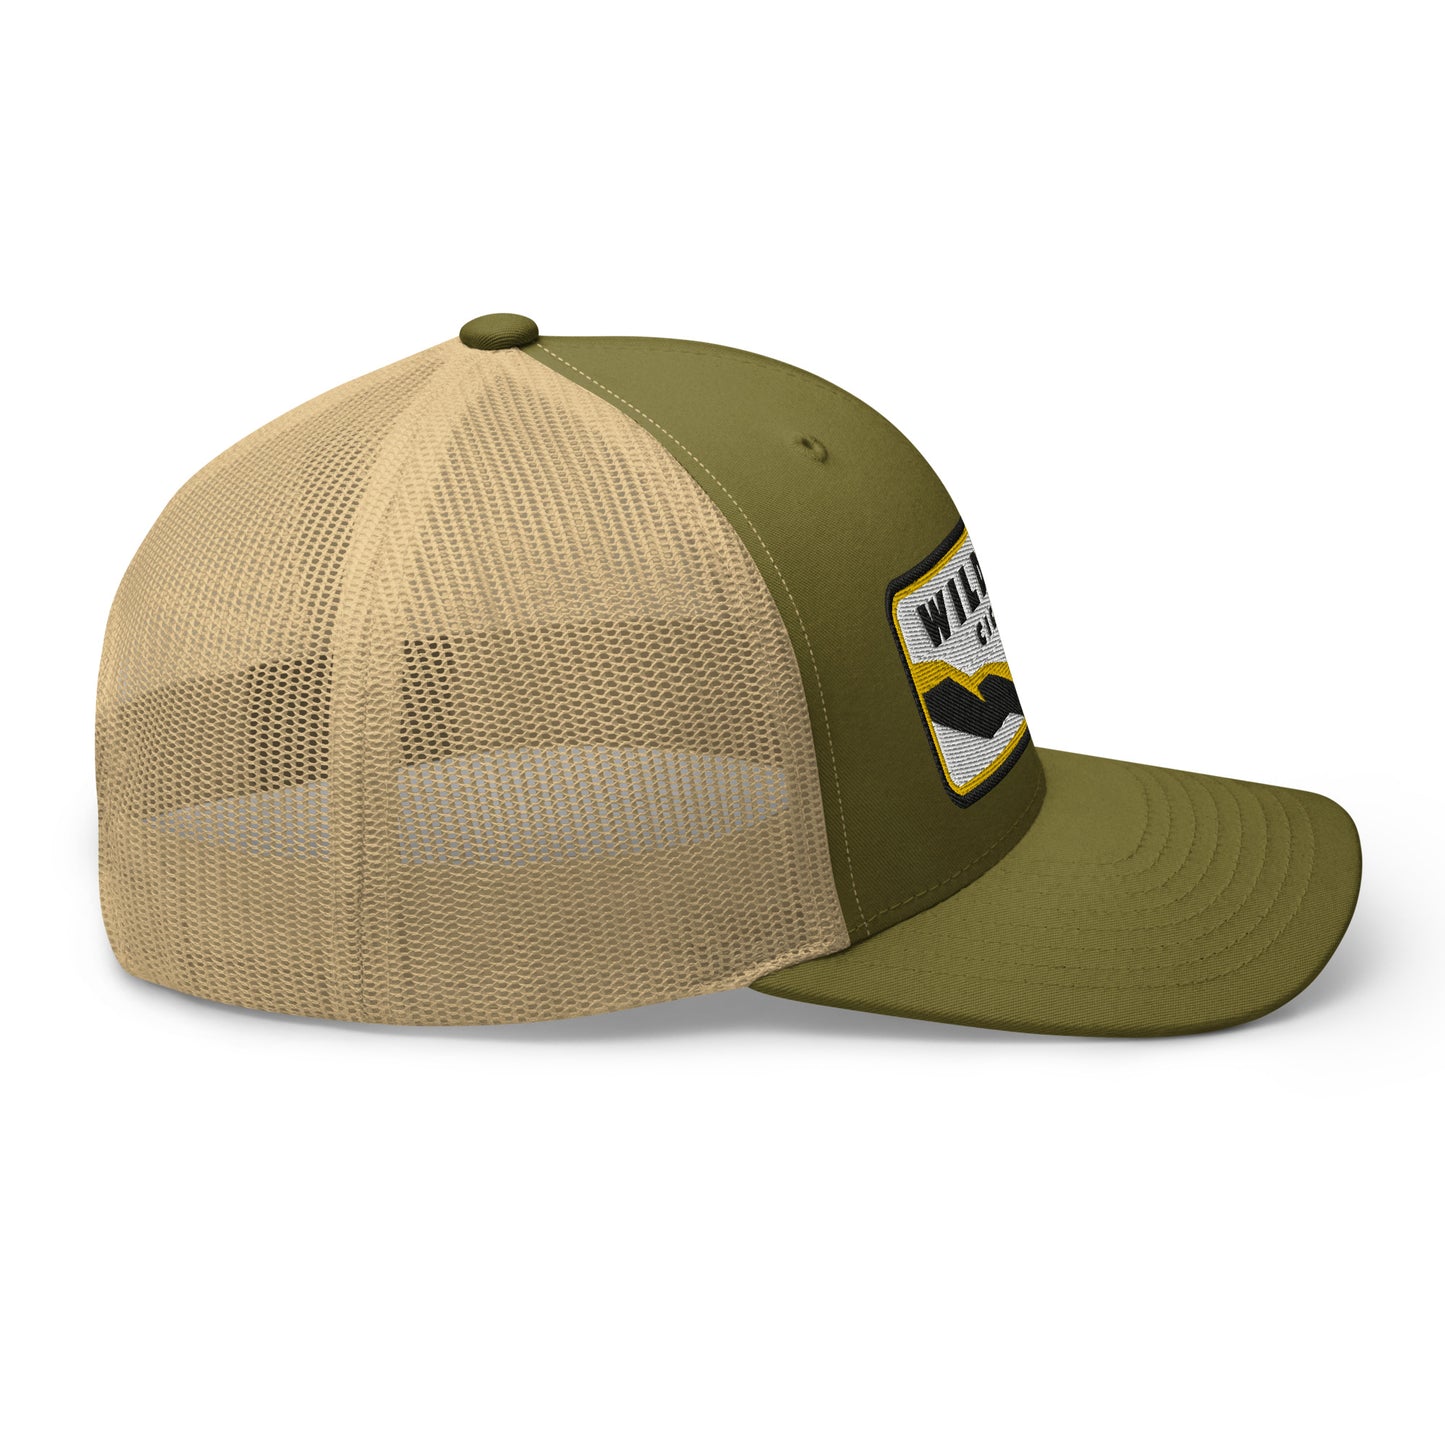 Wildfire Cigars retro trucker hat in moss and khaki facing the right